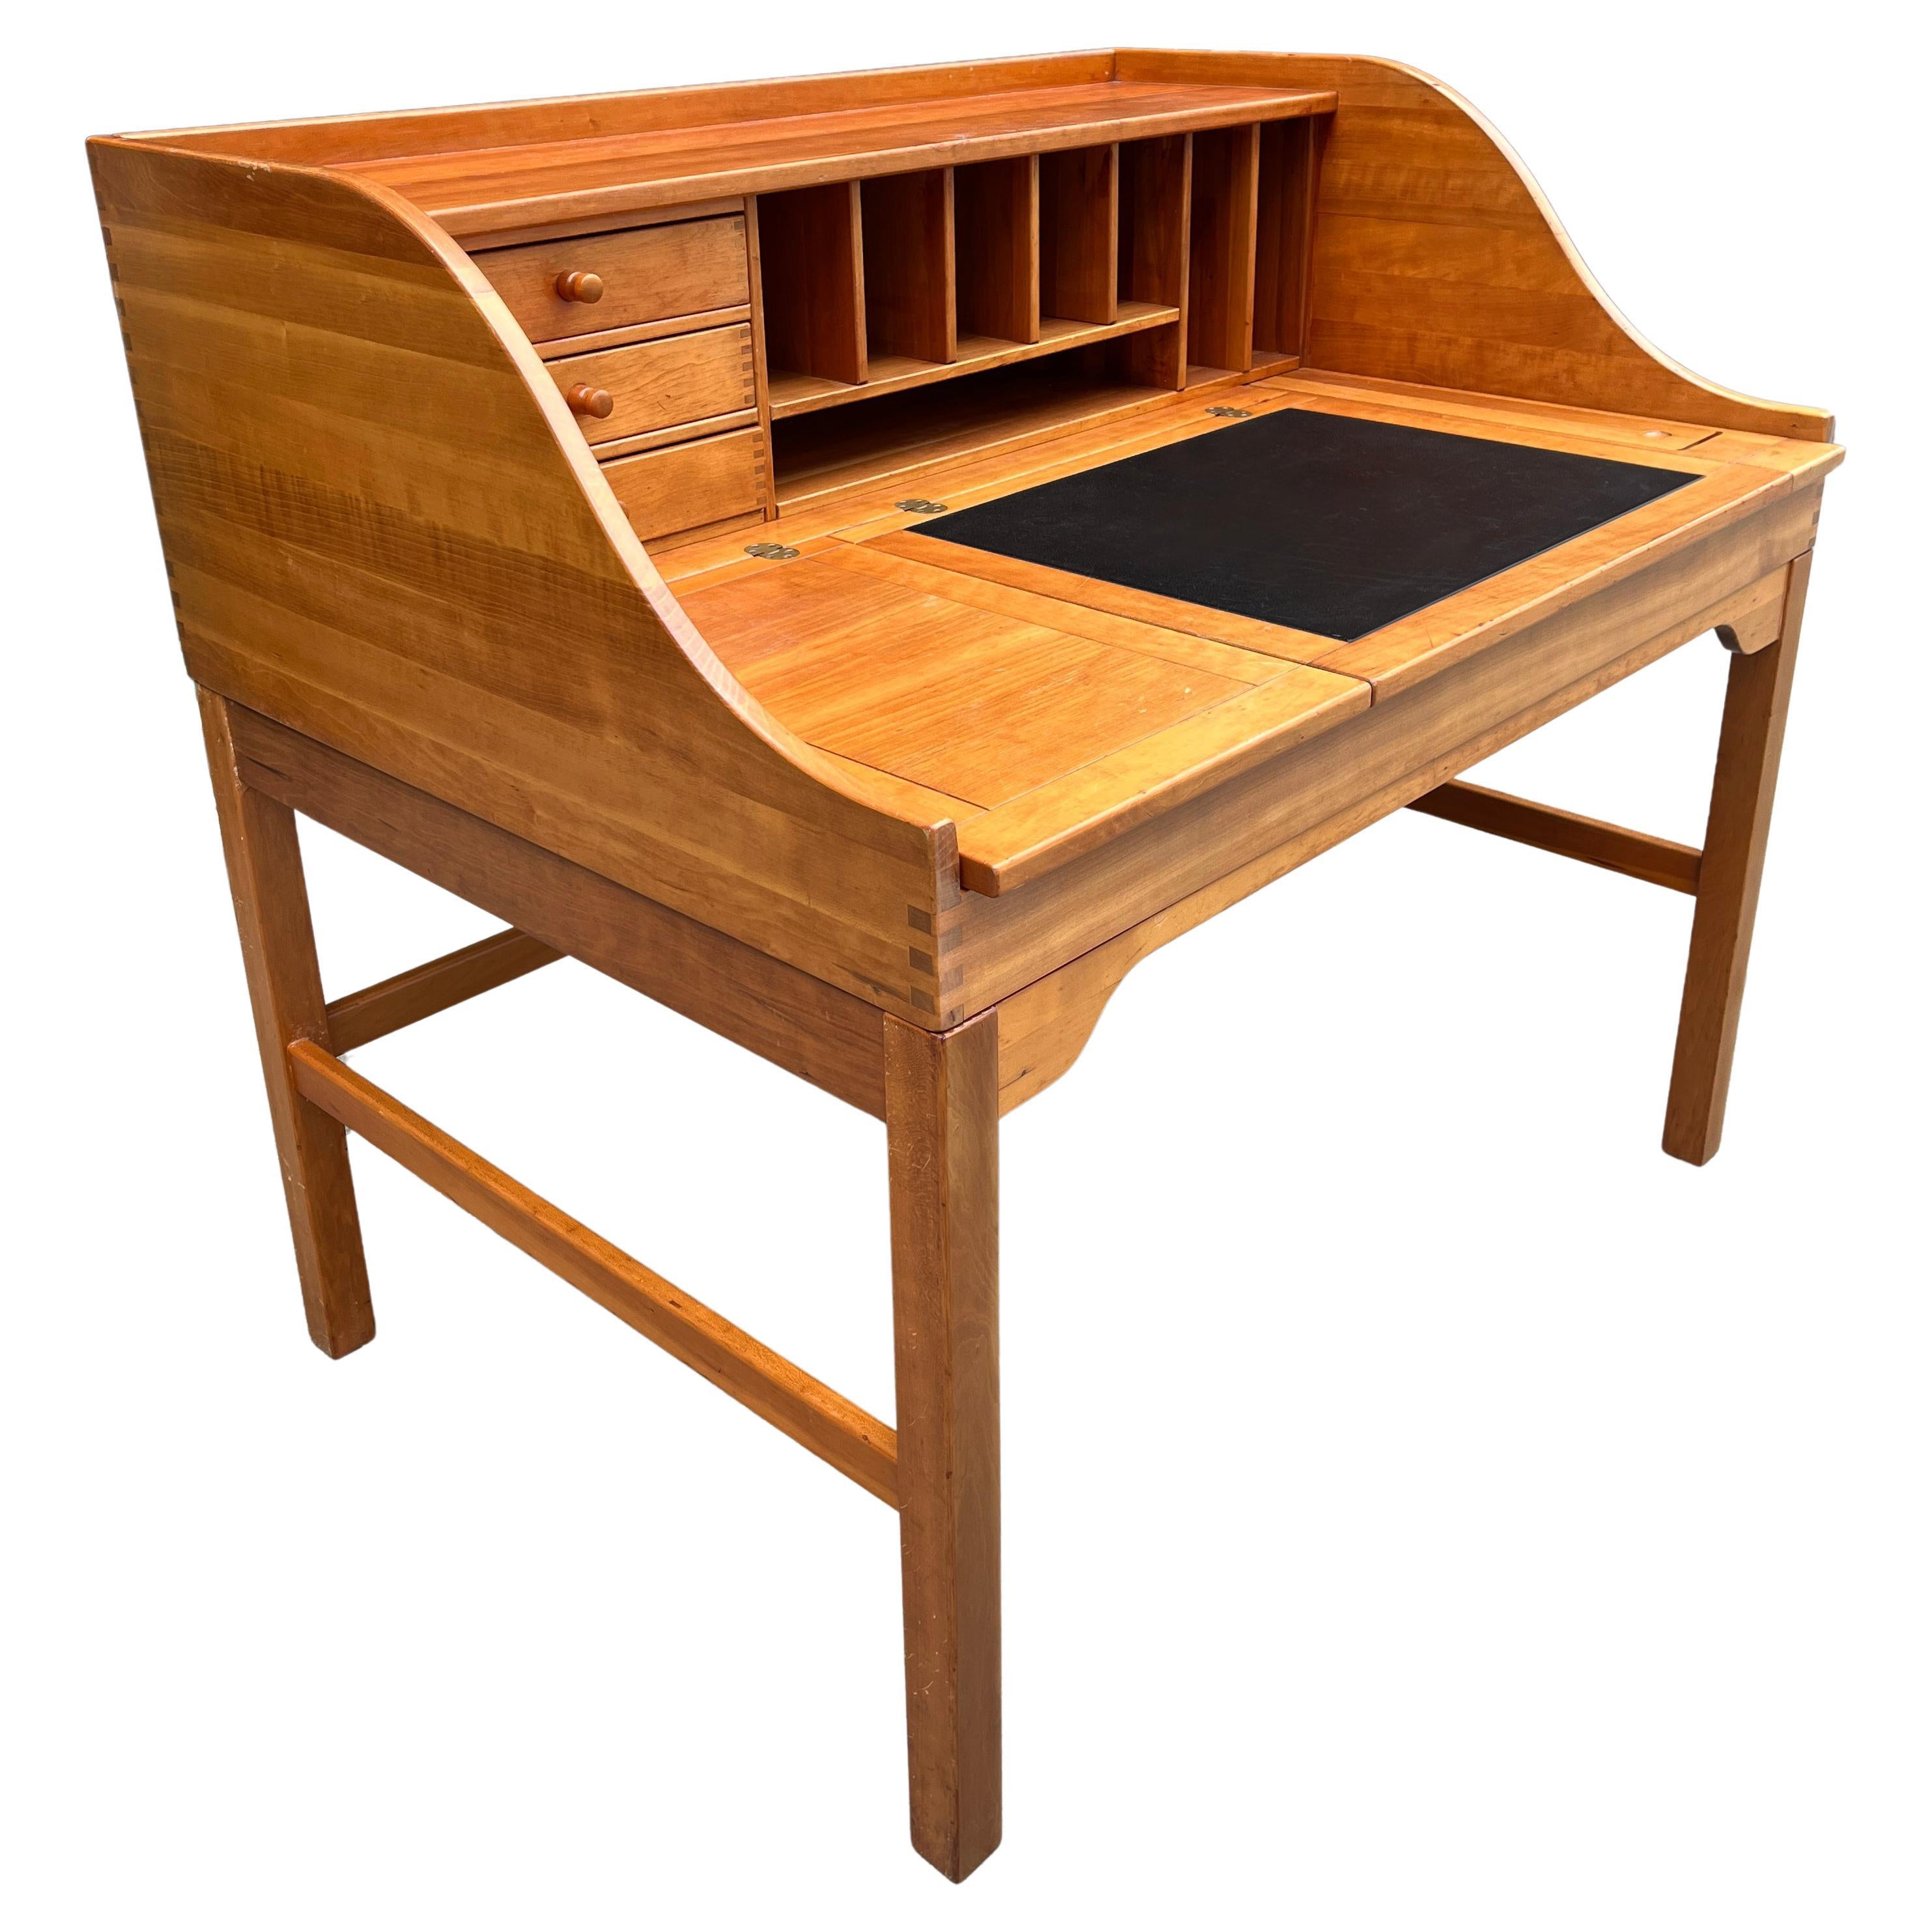 A Mid-Century Modern free-standing desk made Cherry with a likeness of teak wood, designed by Andreas Hansen. Featuring large top with three compartments. Two with flip top leaves, and under storage compartments, middle section with a black leather